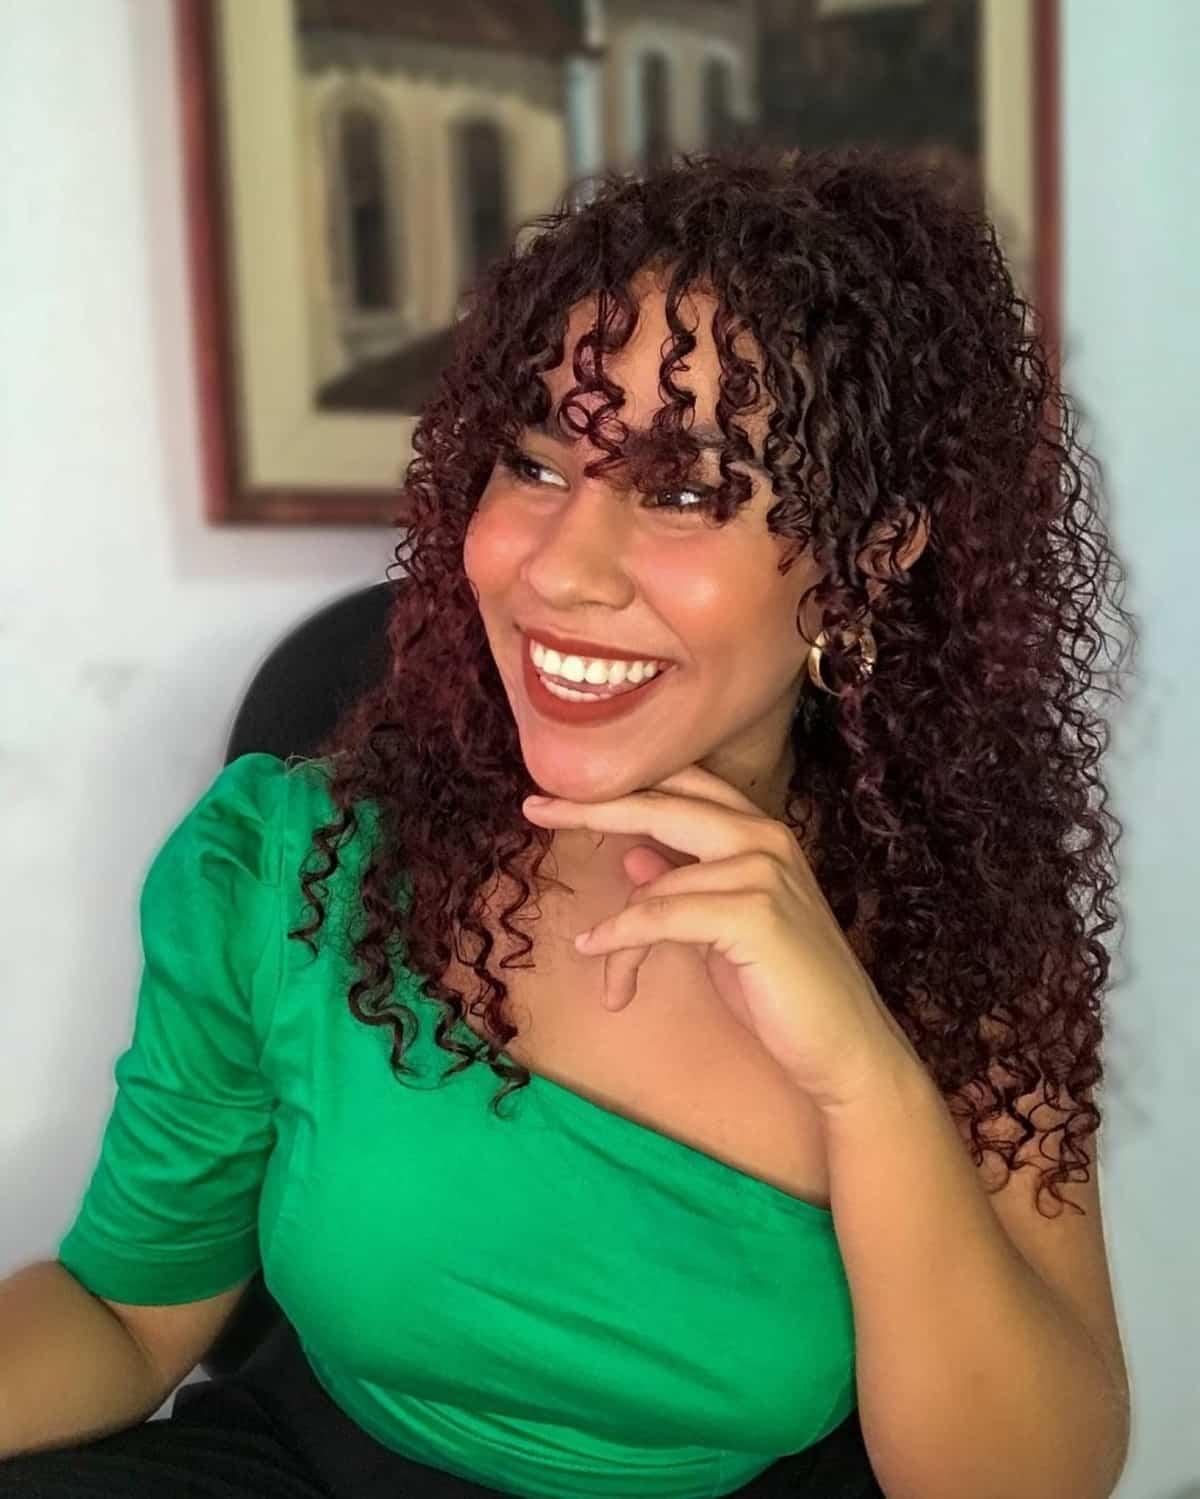 The 21 Cutest Examples of Naturally Curly Hair with Bangs